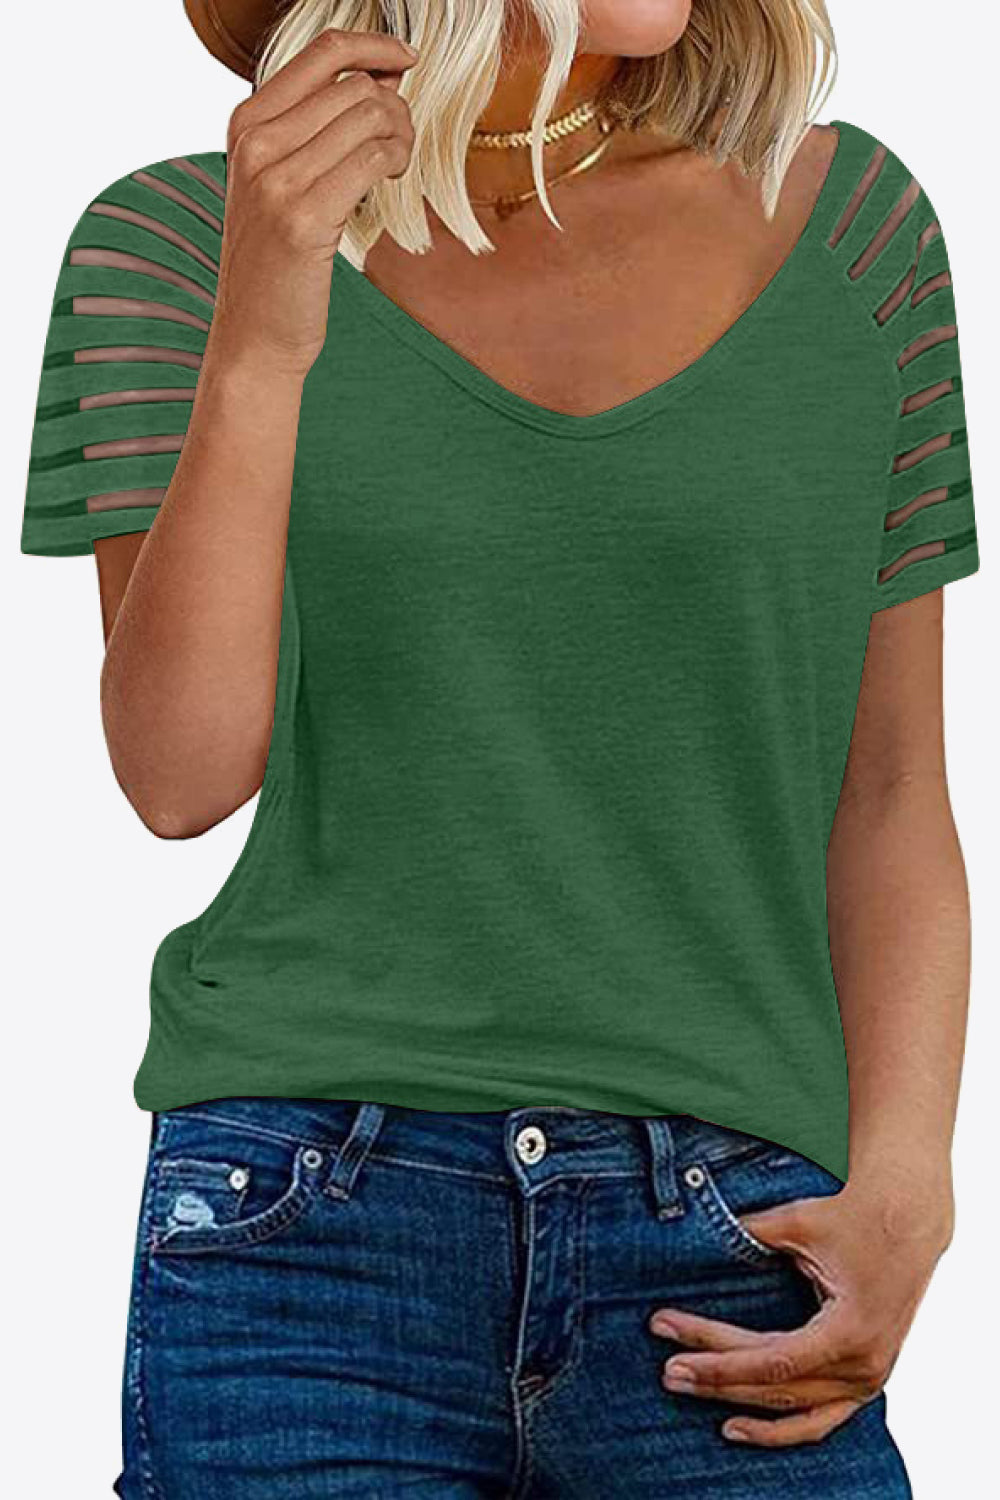 Mid Green Forest Green Dark Green Womens Sheer Striped Sleeve Tee in 8 colors, Very Highly Stretchy Rayon Spandex Blend Fabric Material, True to Size Fit, Shortsleeve Tee, V-Neckline